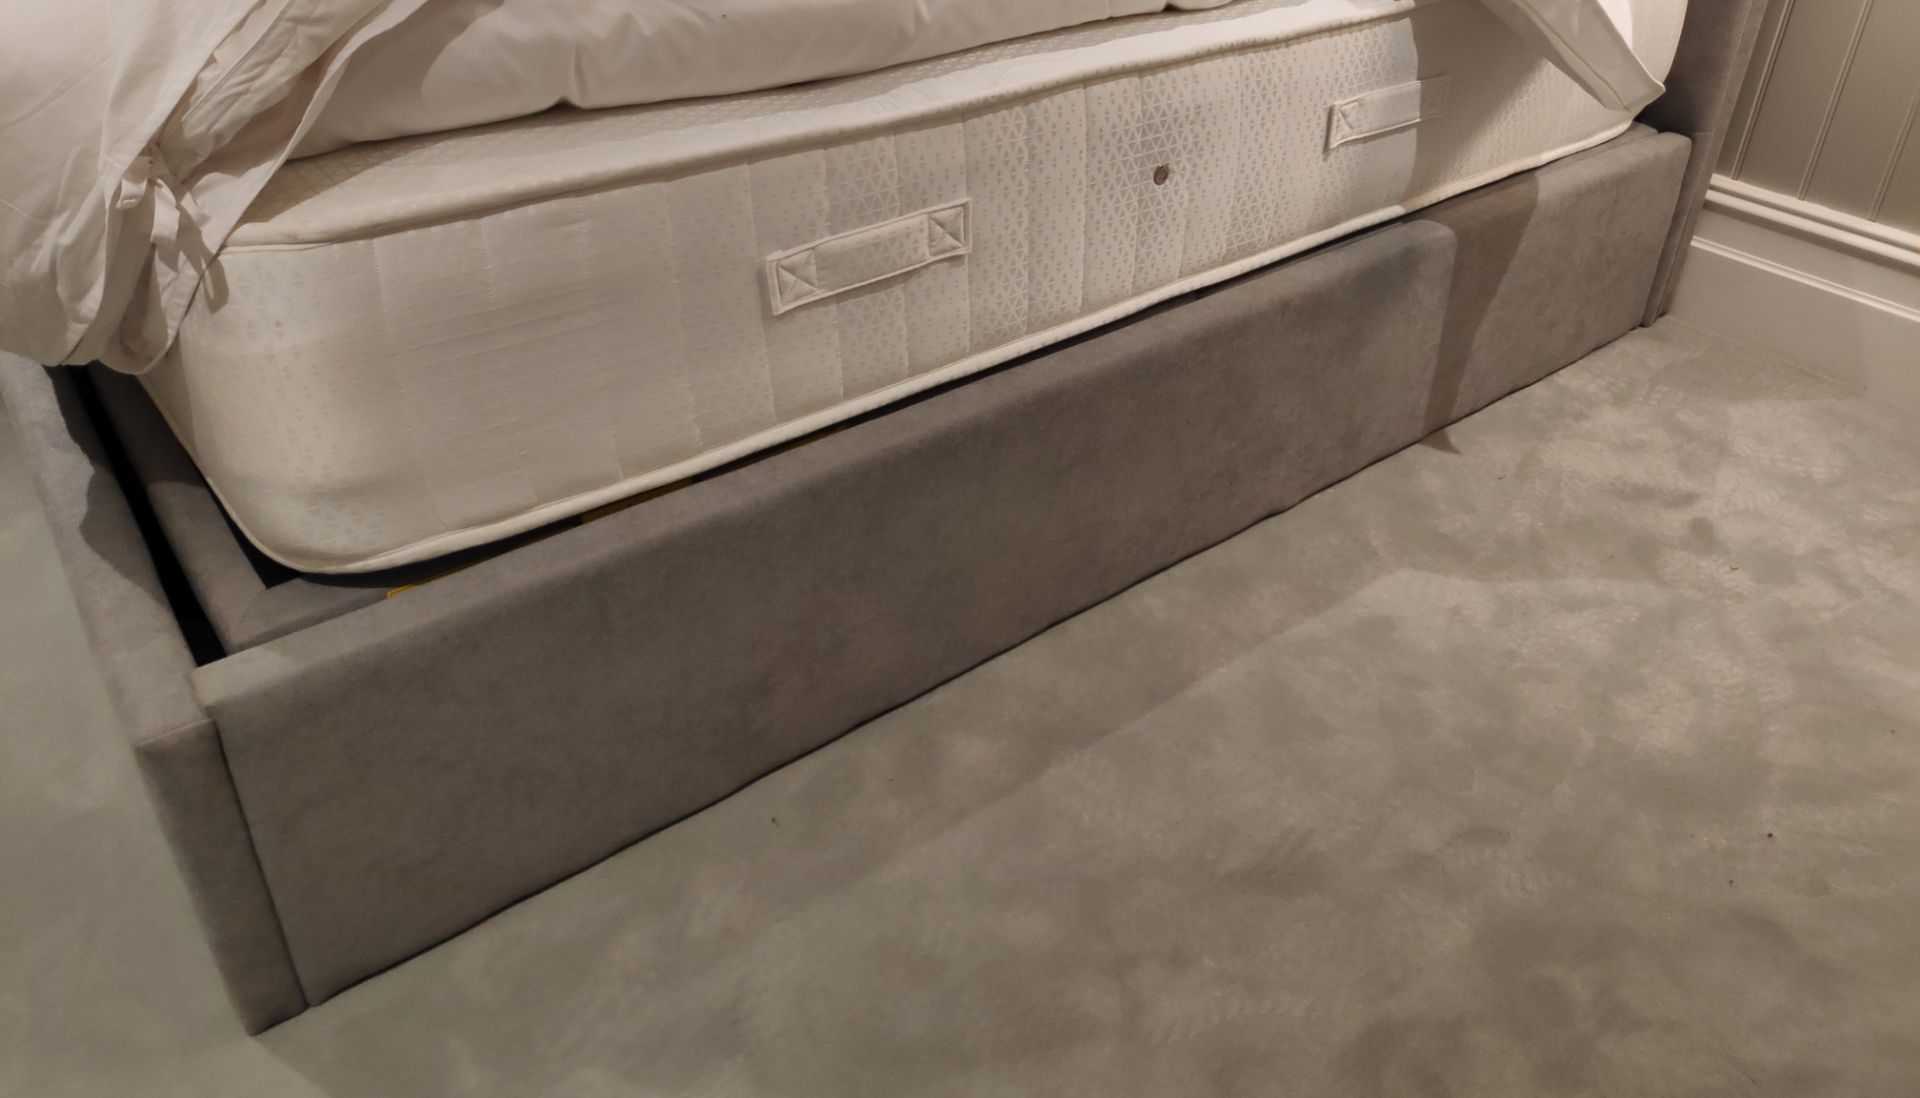 1 x Super King Bed including Buttoned And Pleated Headboard, Base and Sweet Dream Sleepzone Mattress - Image 11 of 14